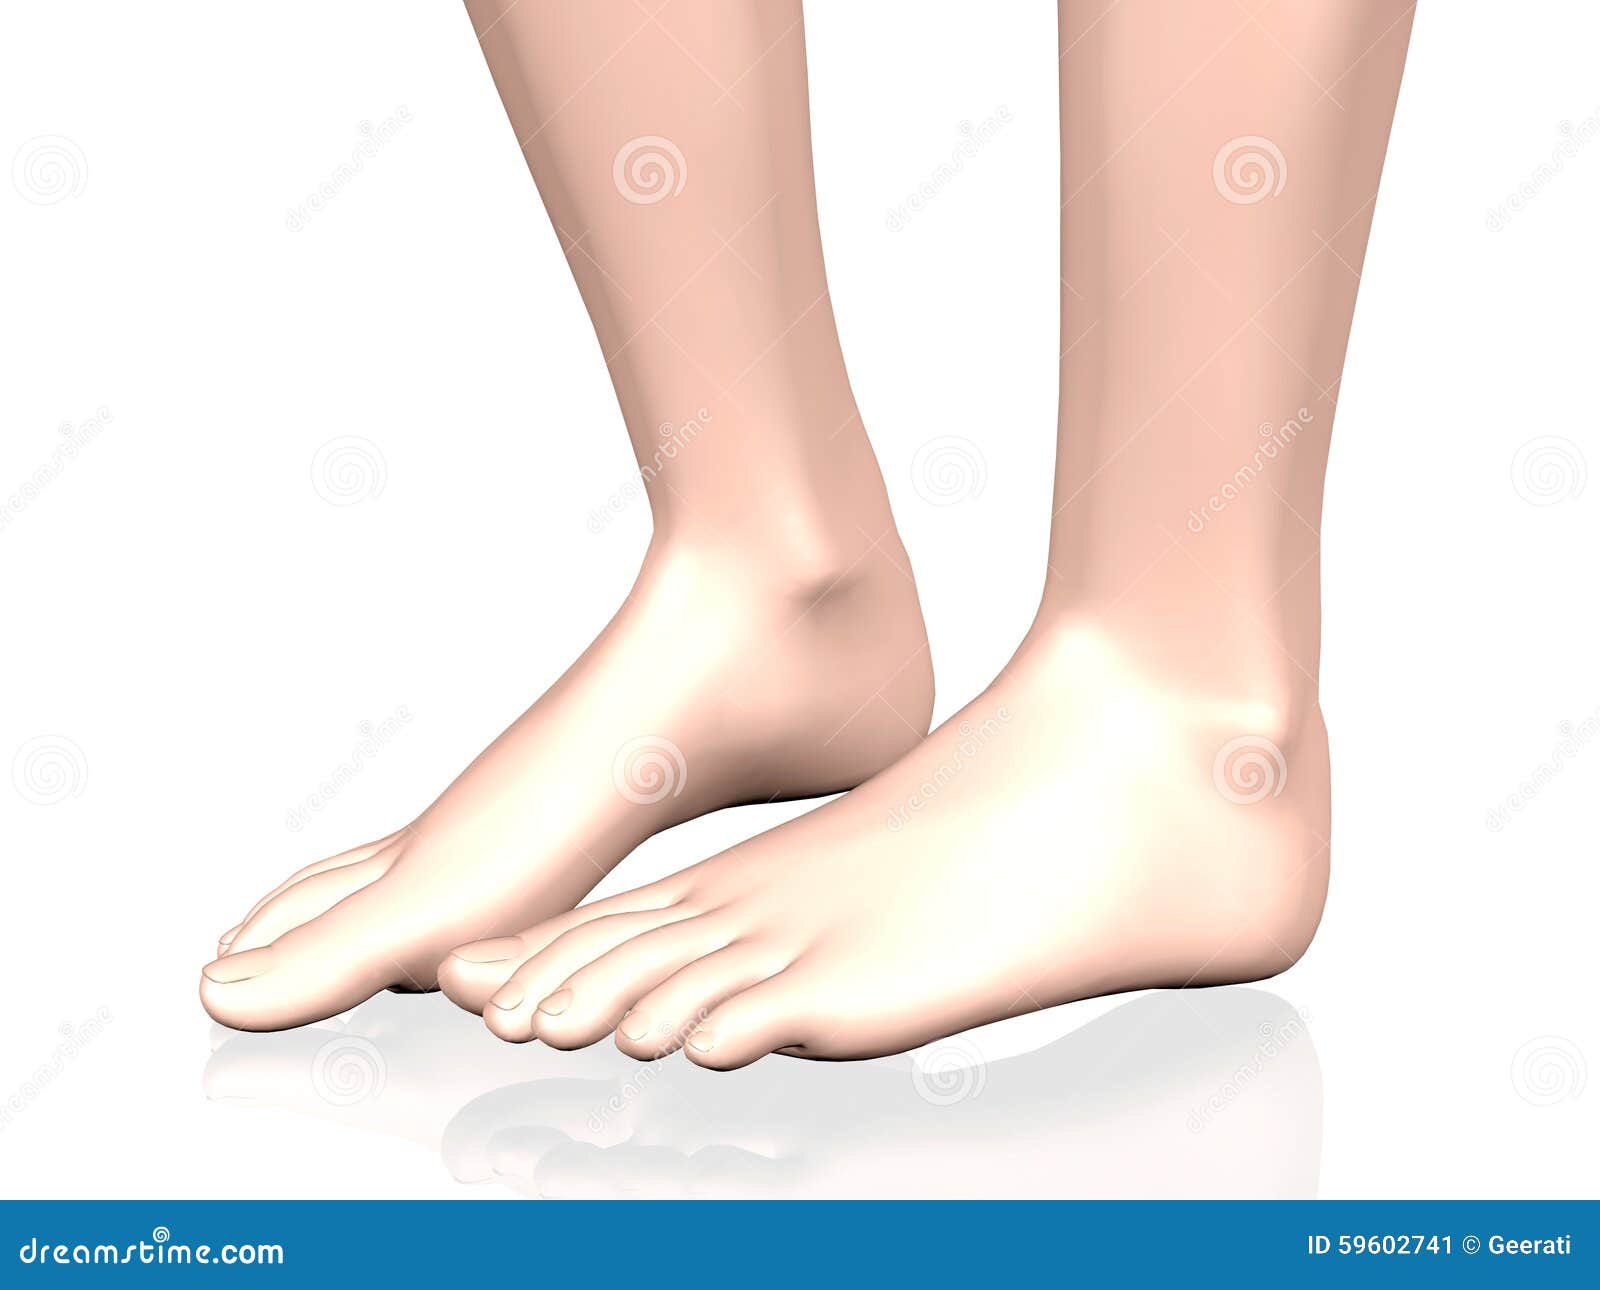 12 Selling Feet Pics Images, Stock Photos, 3D objects, & Vectors